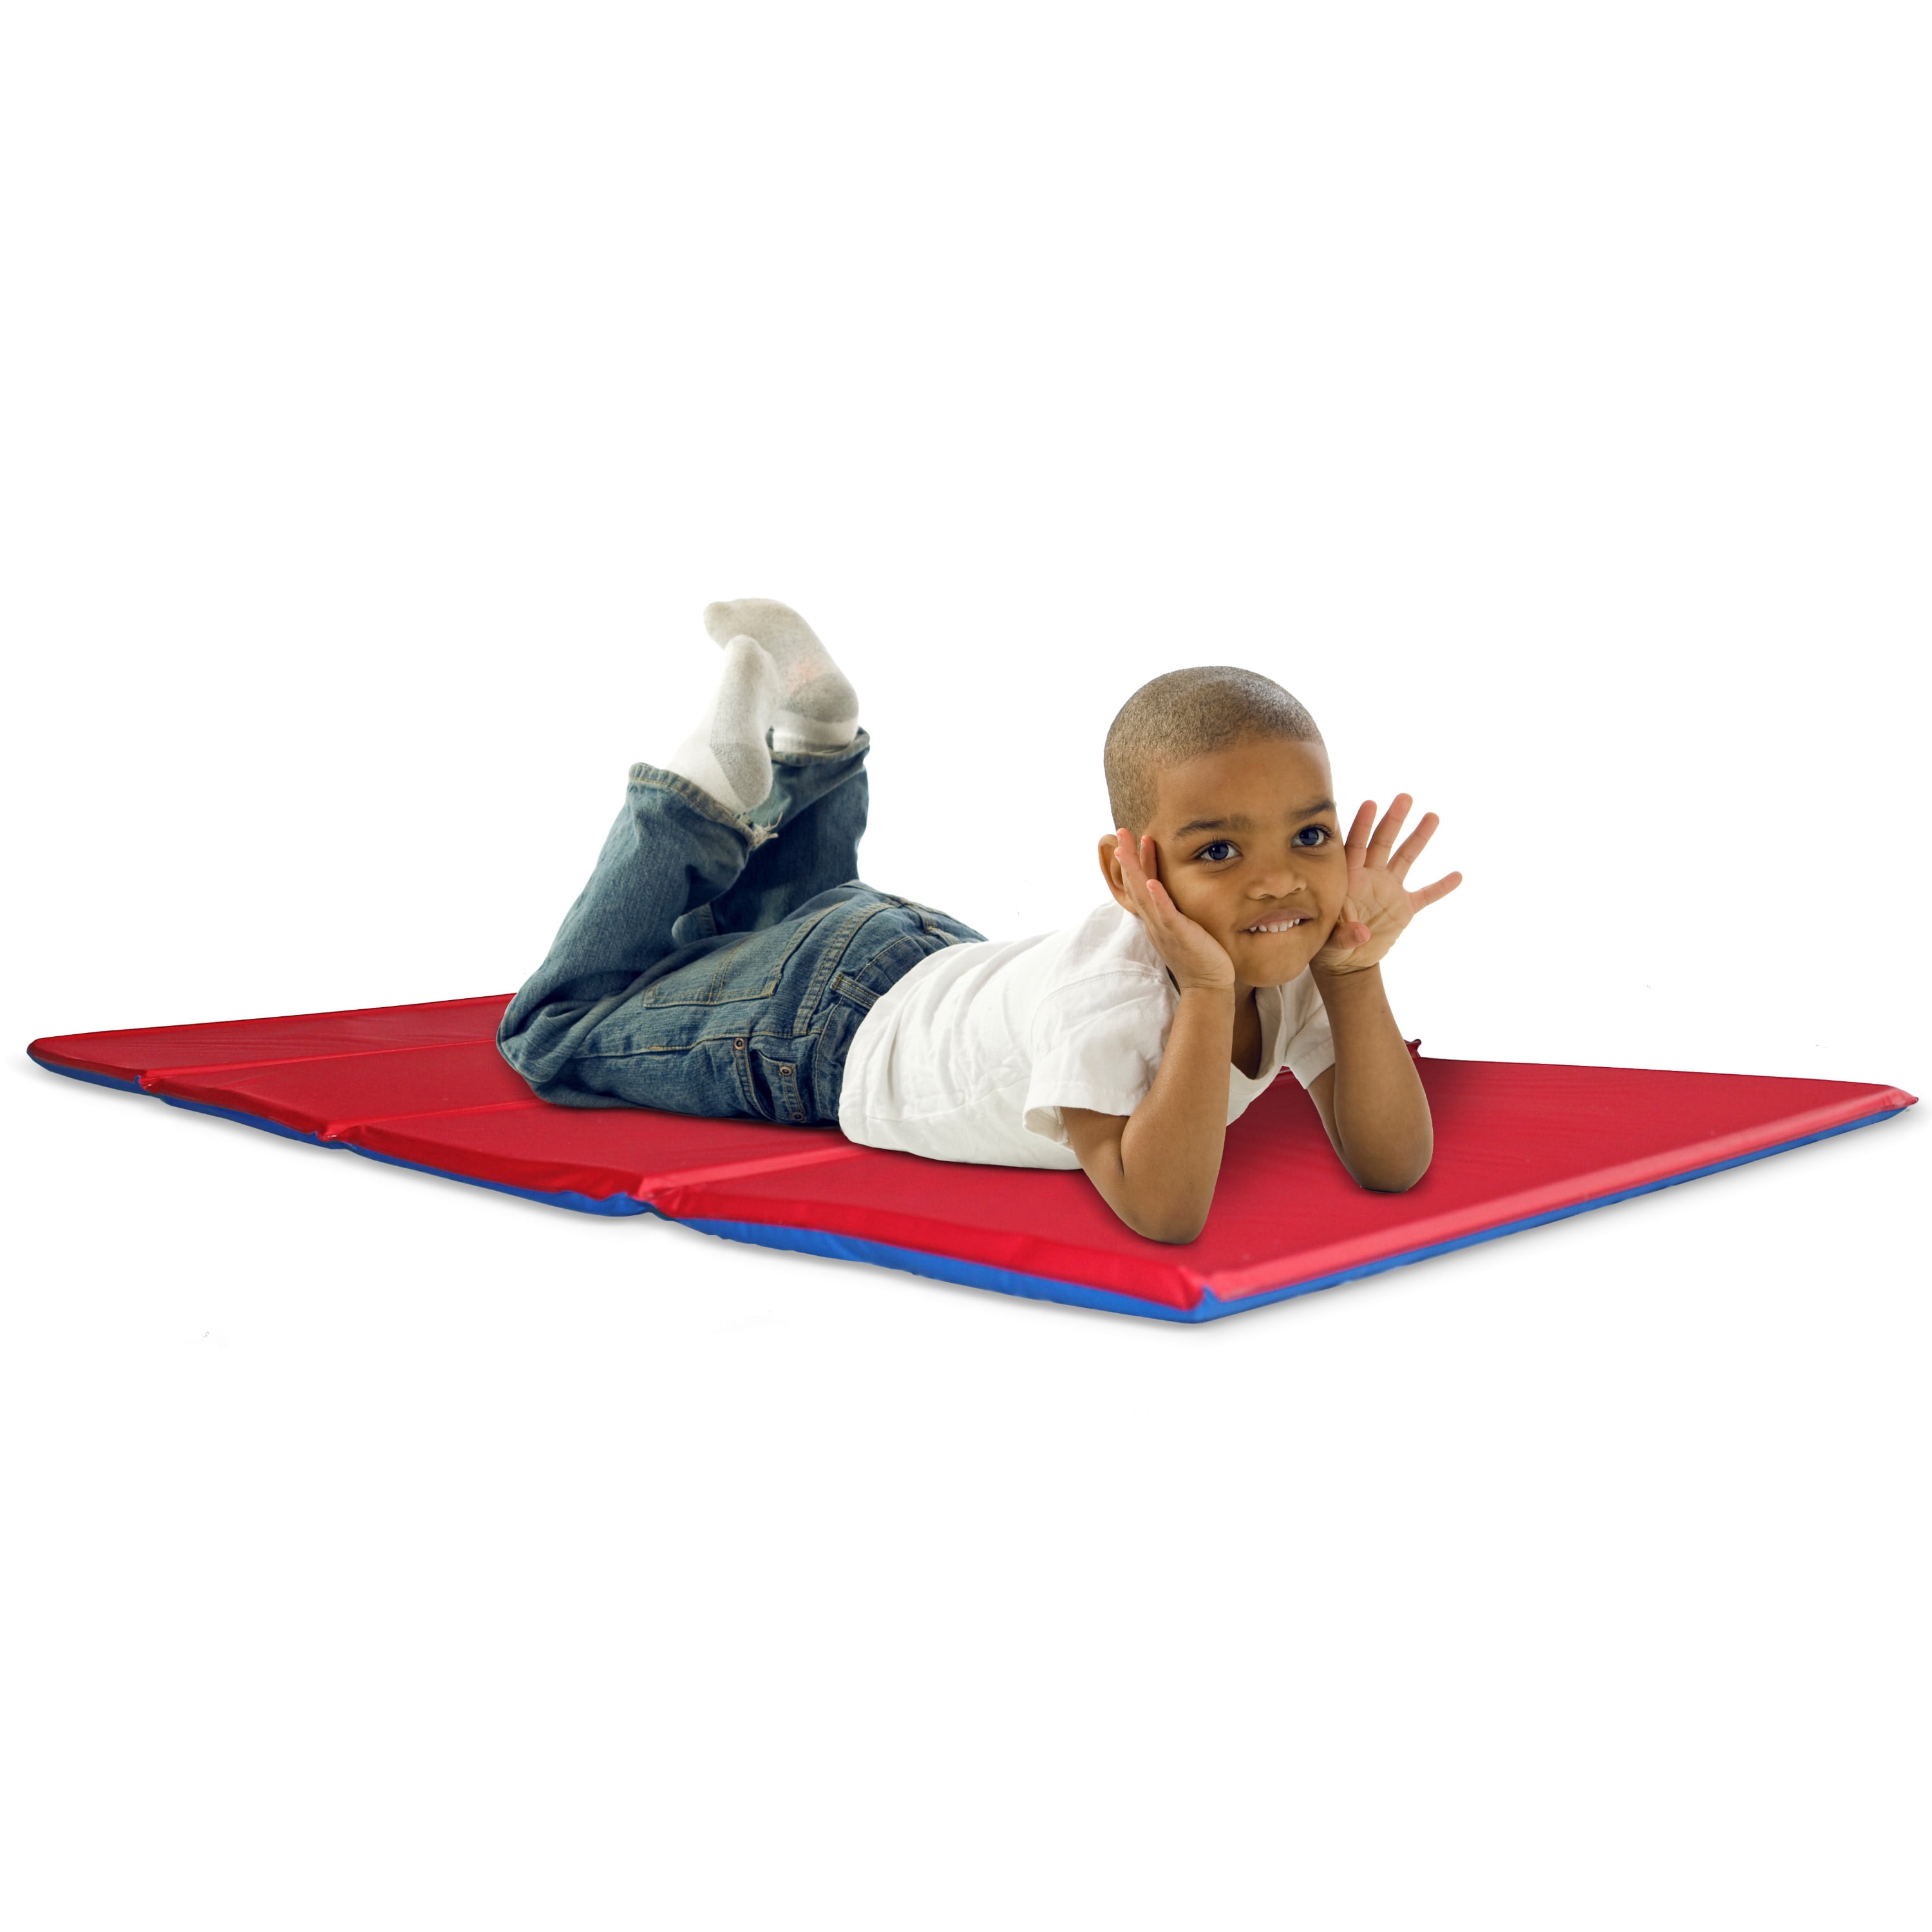 Travel 4-Section Rest Mat Red/Blue KinderMat Great for School and Home 45 x 19 x 5/8 5/8 Thick Pack of 12 Daycare Made in The USA 